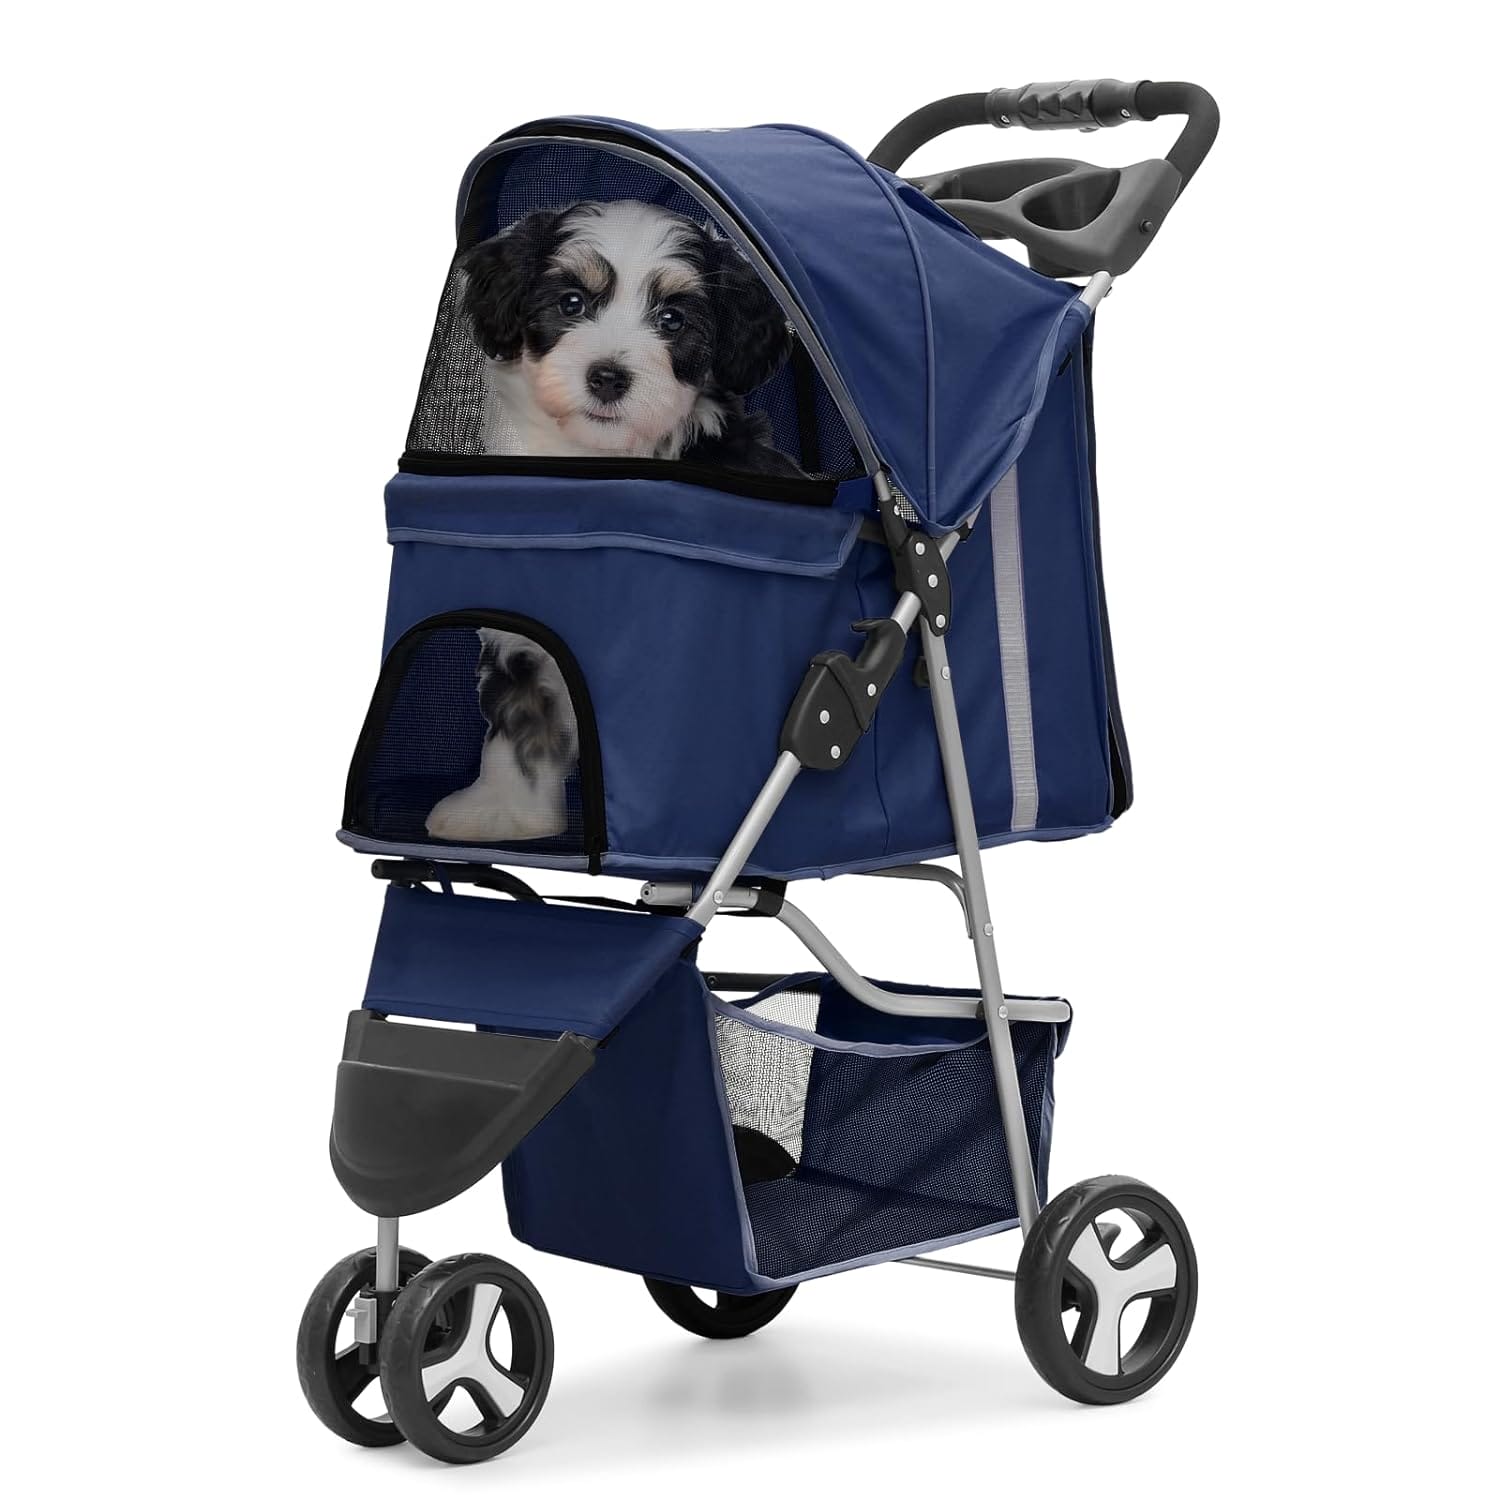 Magshion Pet Stroller Review